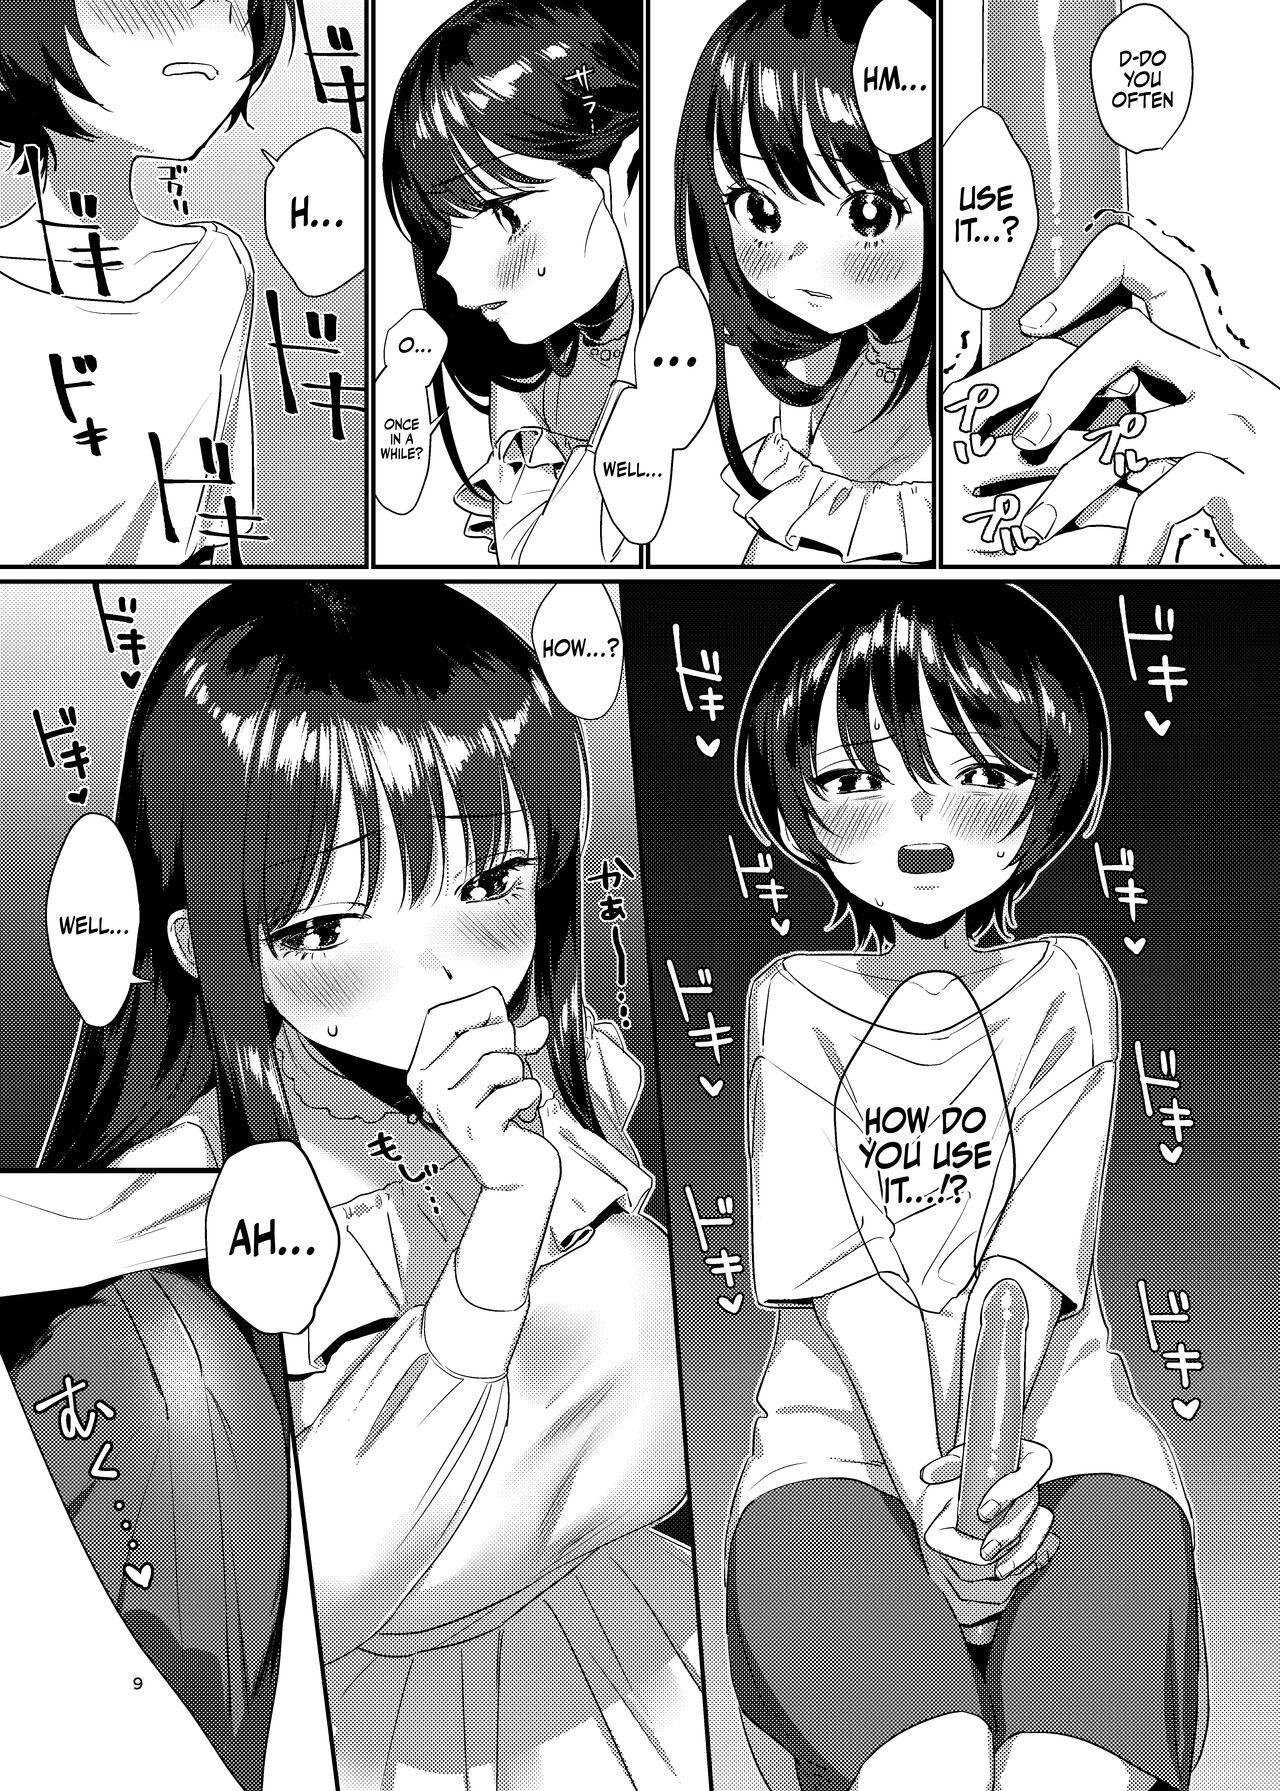 Little Ame, Nochi to Nari no Onee-san | Ame, Later Sister - Original Cum In Mouth - Page 8